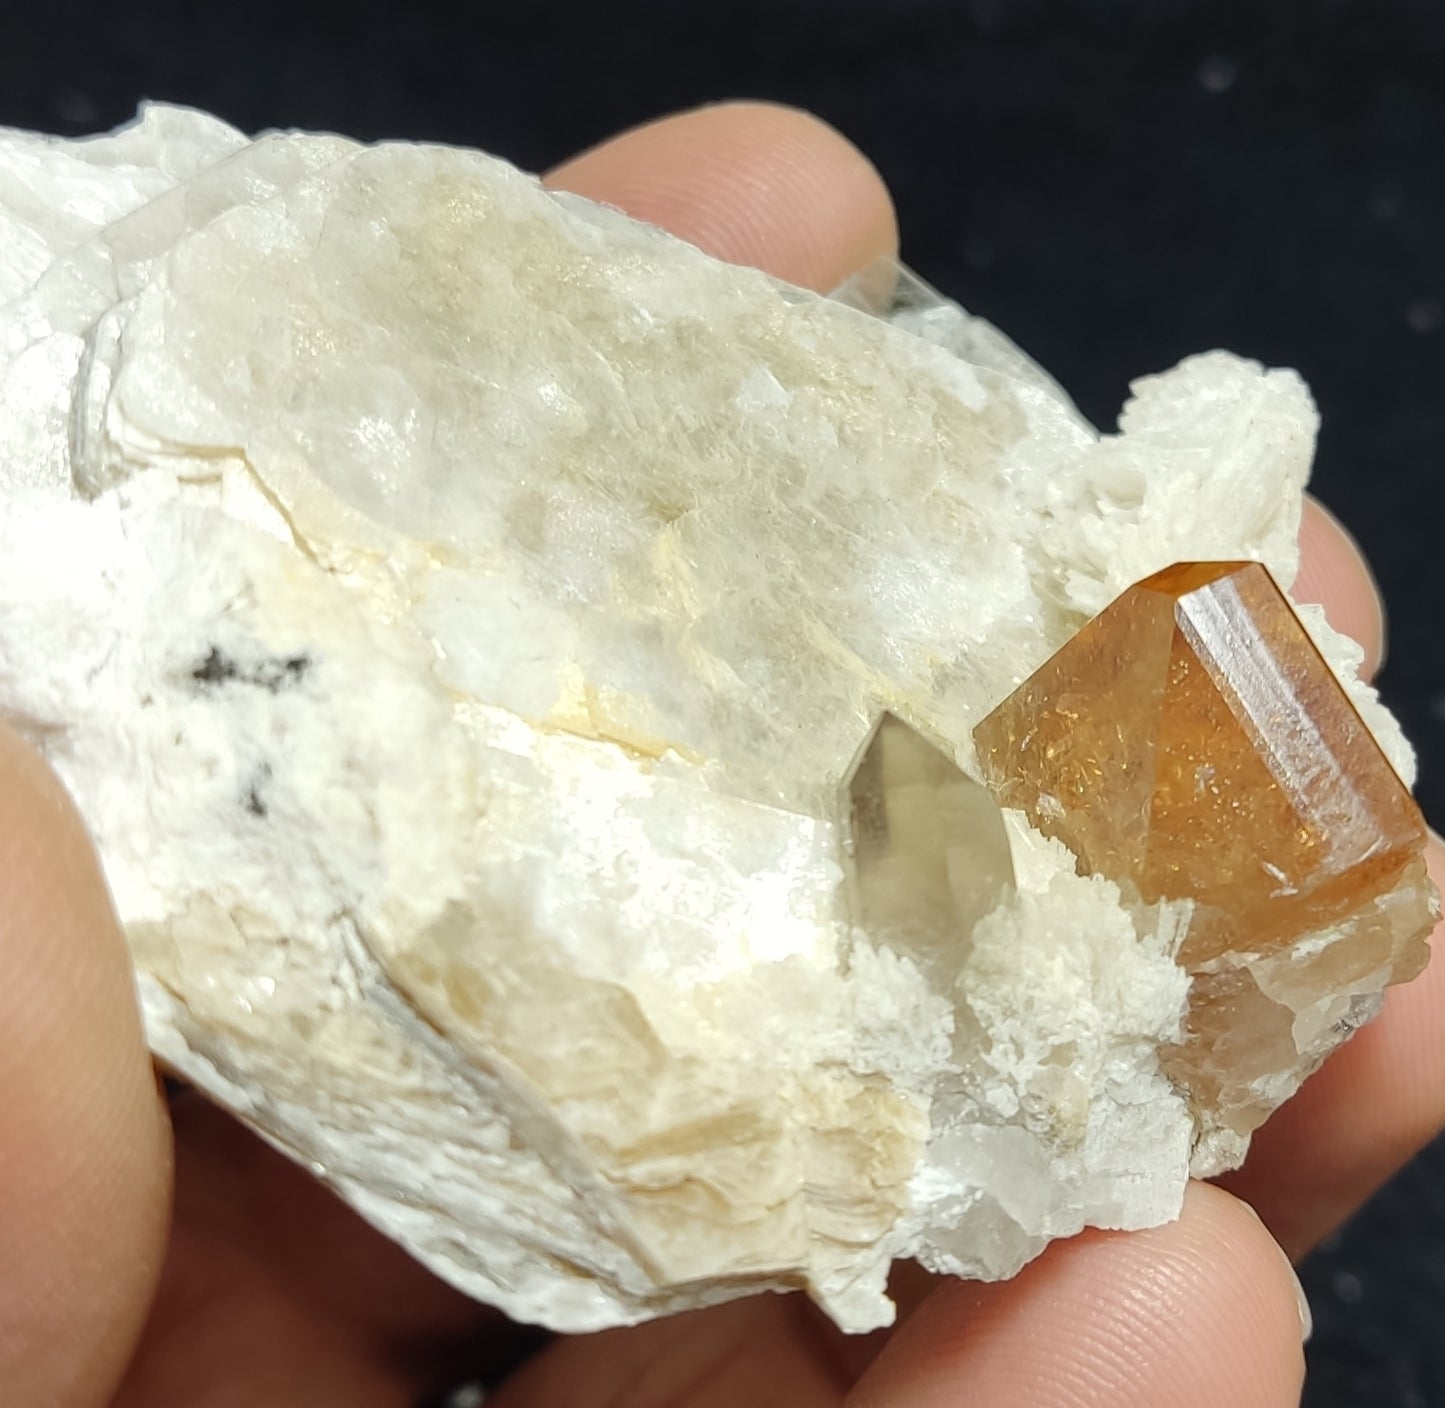 An amazing Specimen of terminated peach color Topaz crystal embedded in muscovite 48 grams